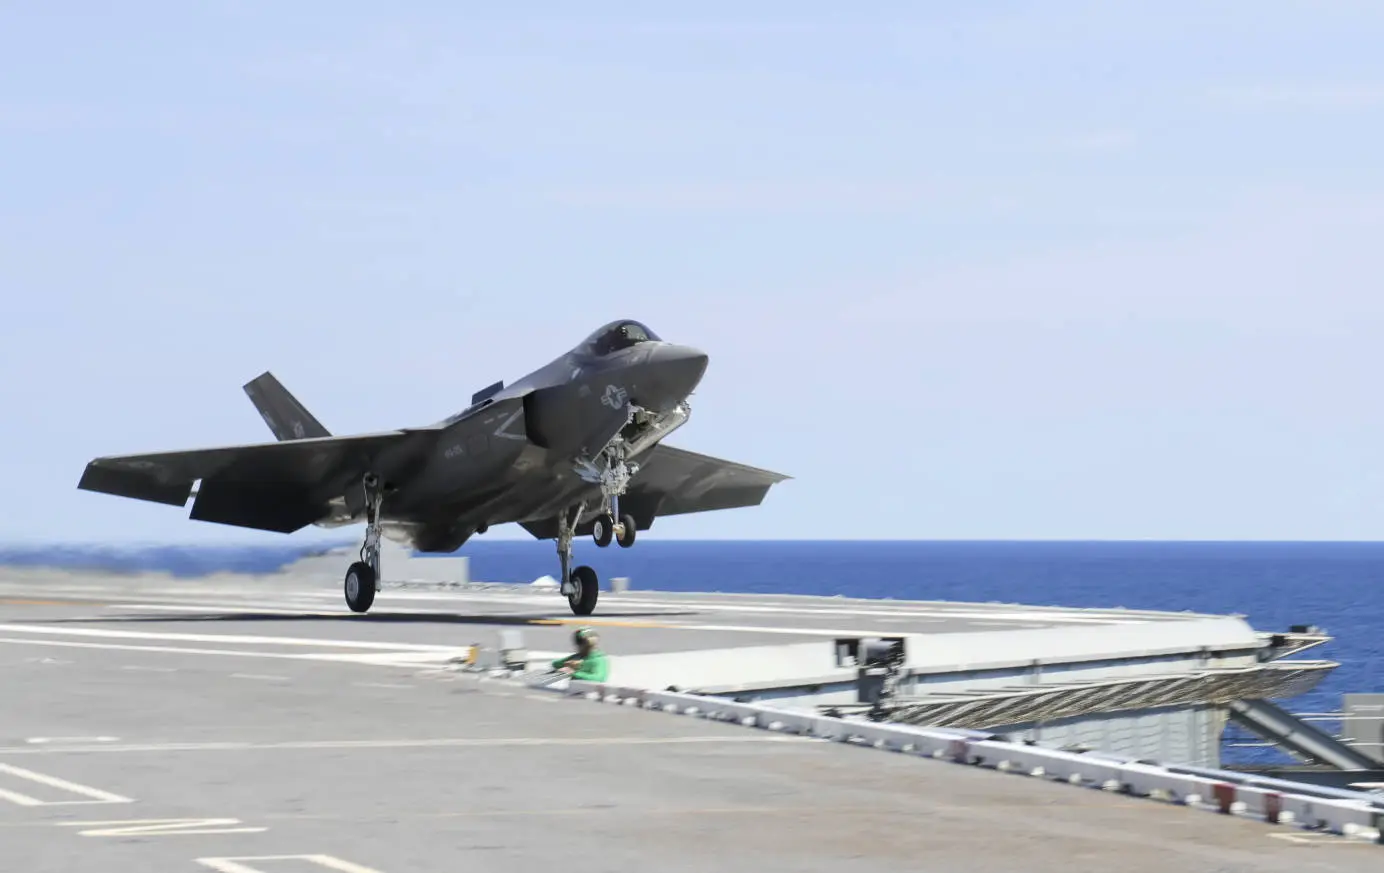 F-35C is developed specifically for carriers